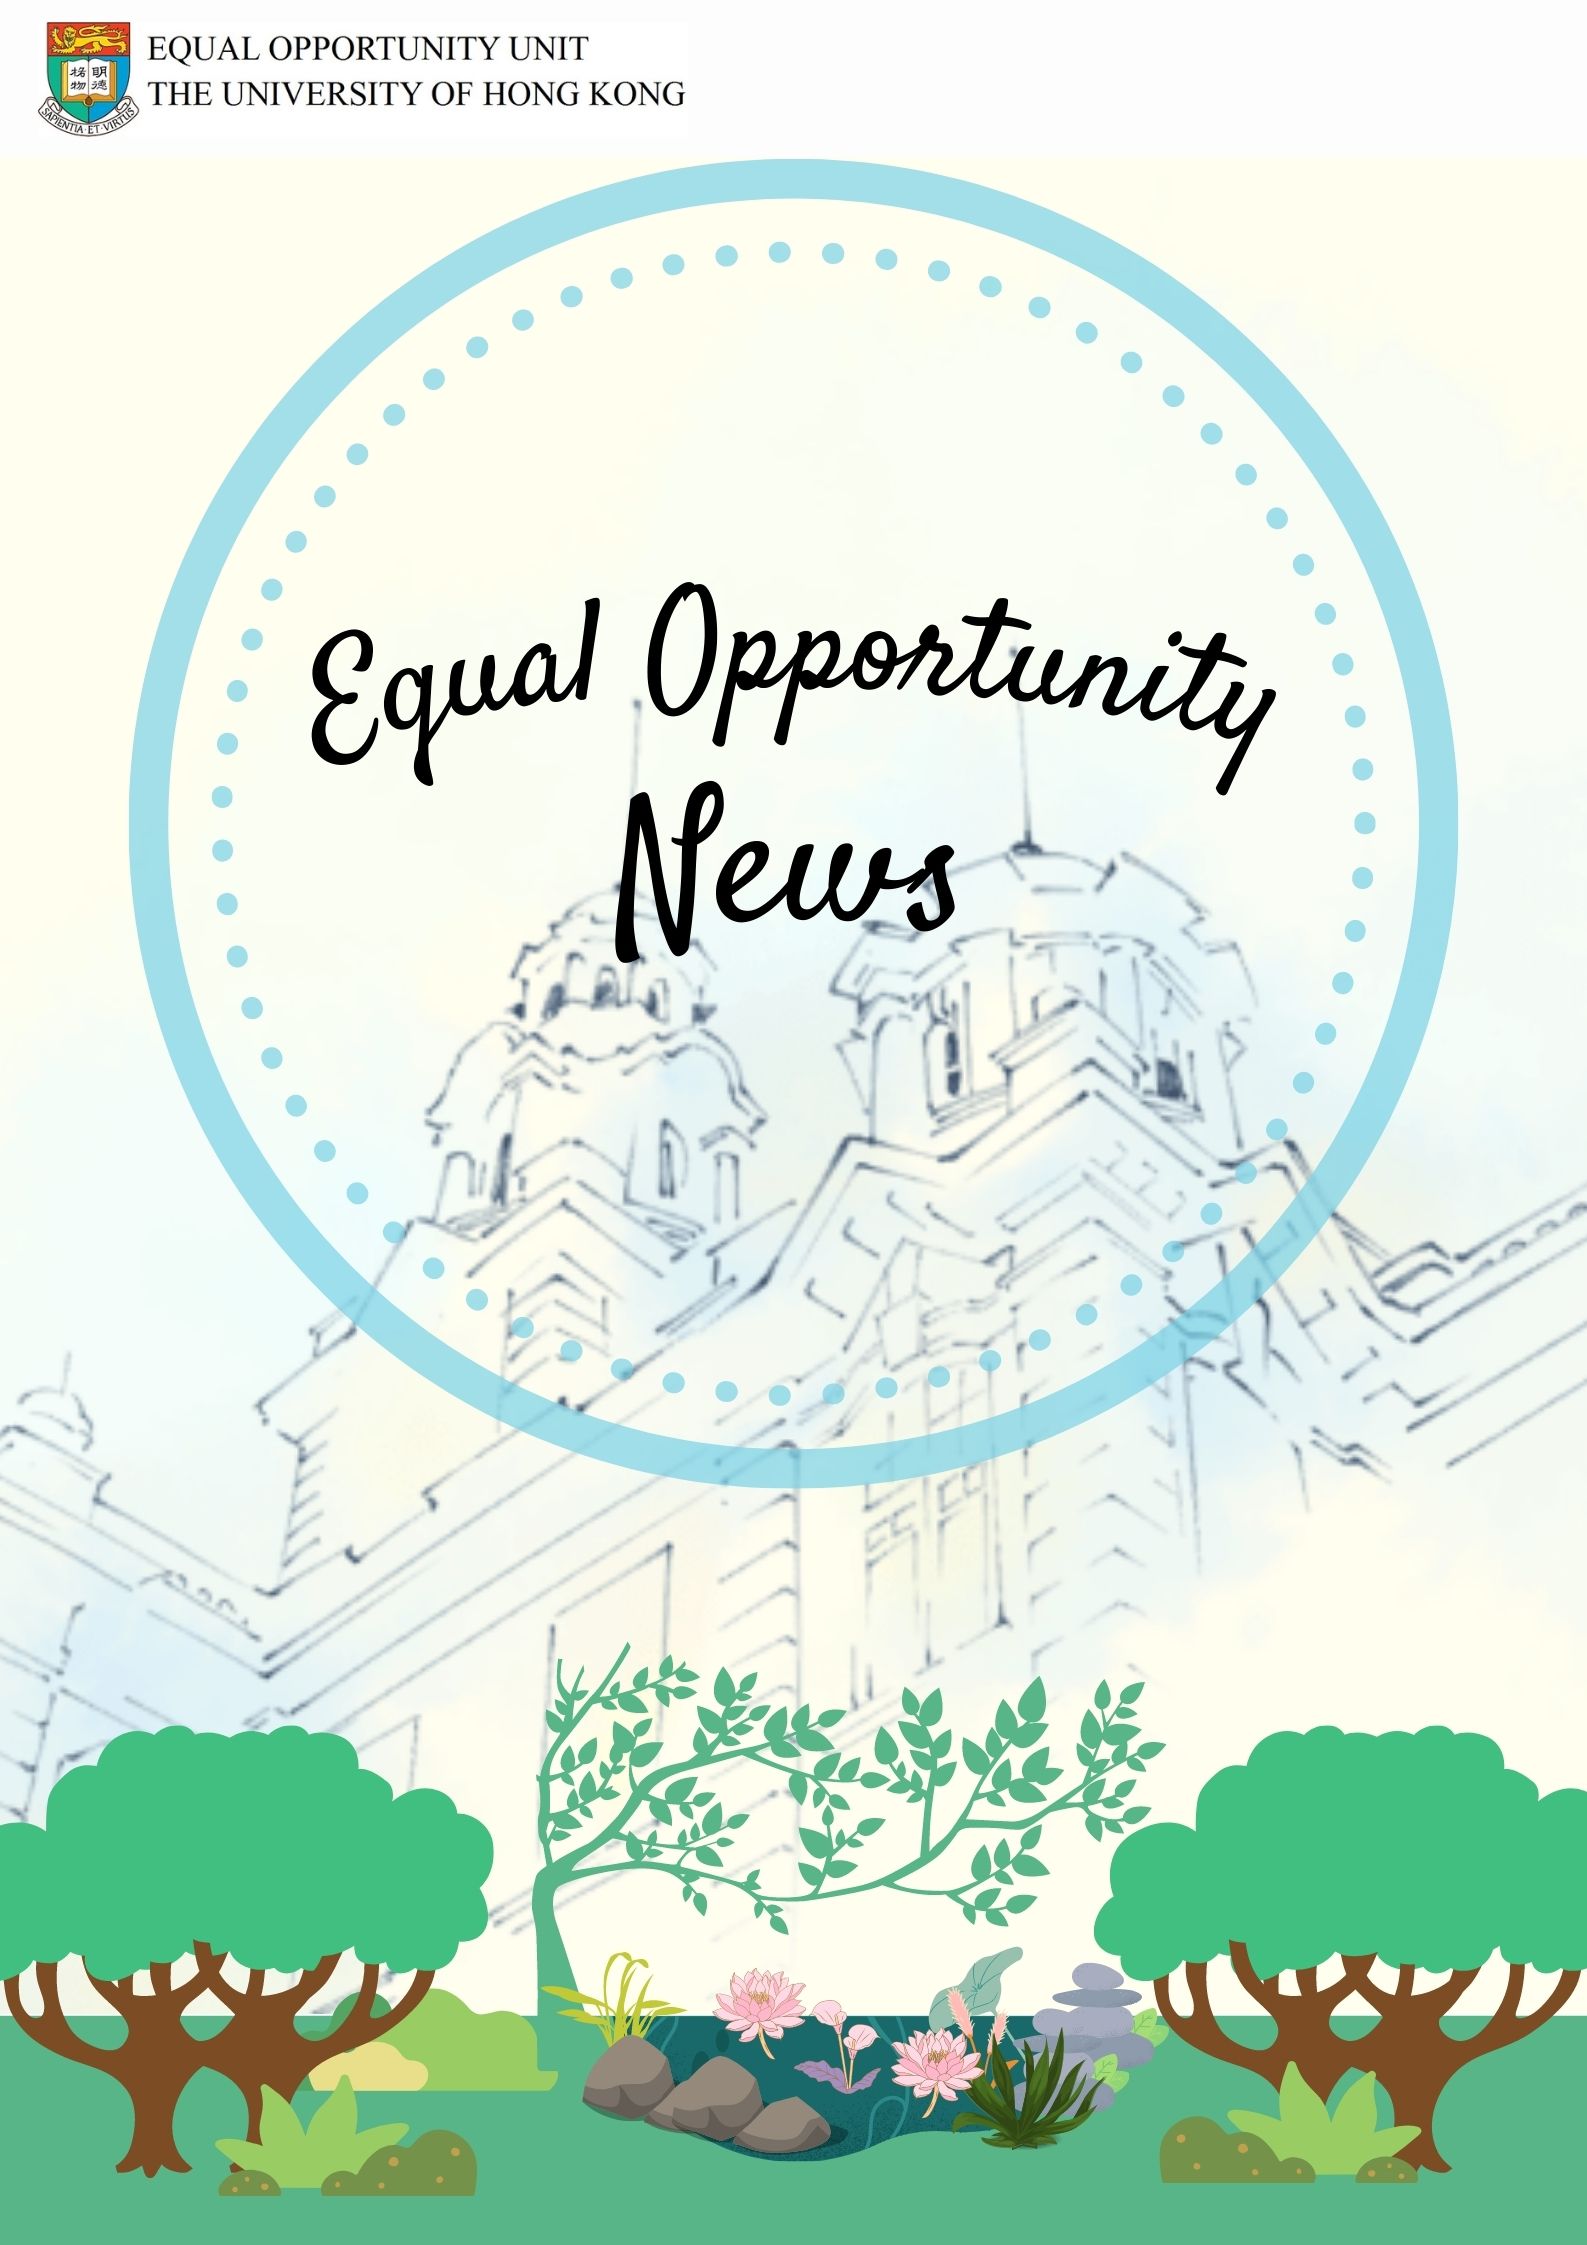 Equal Opportunity News Poster.  Content same as text on this webpage.